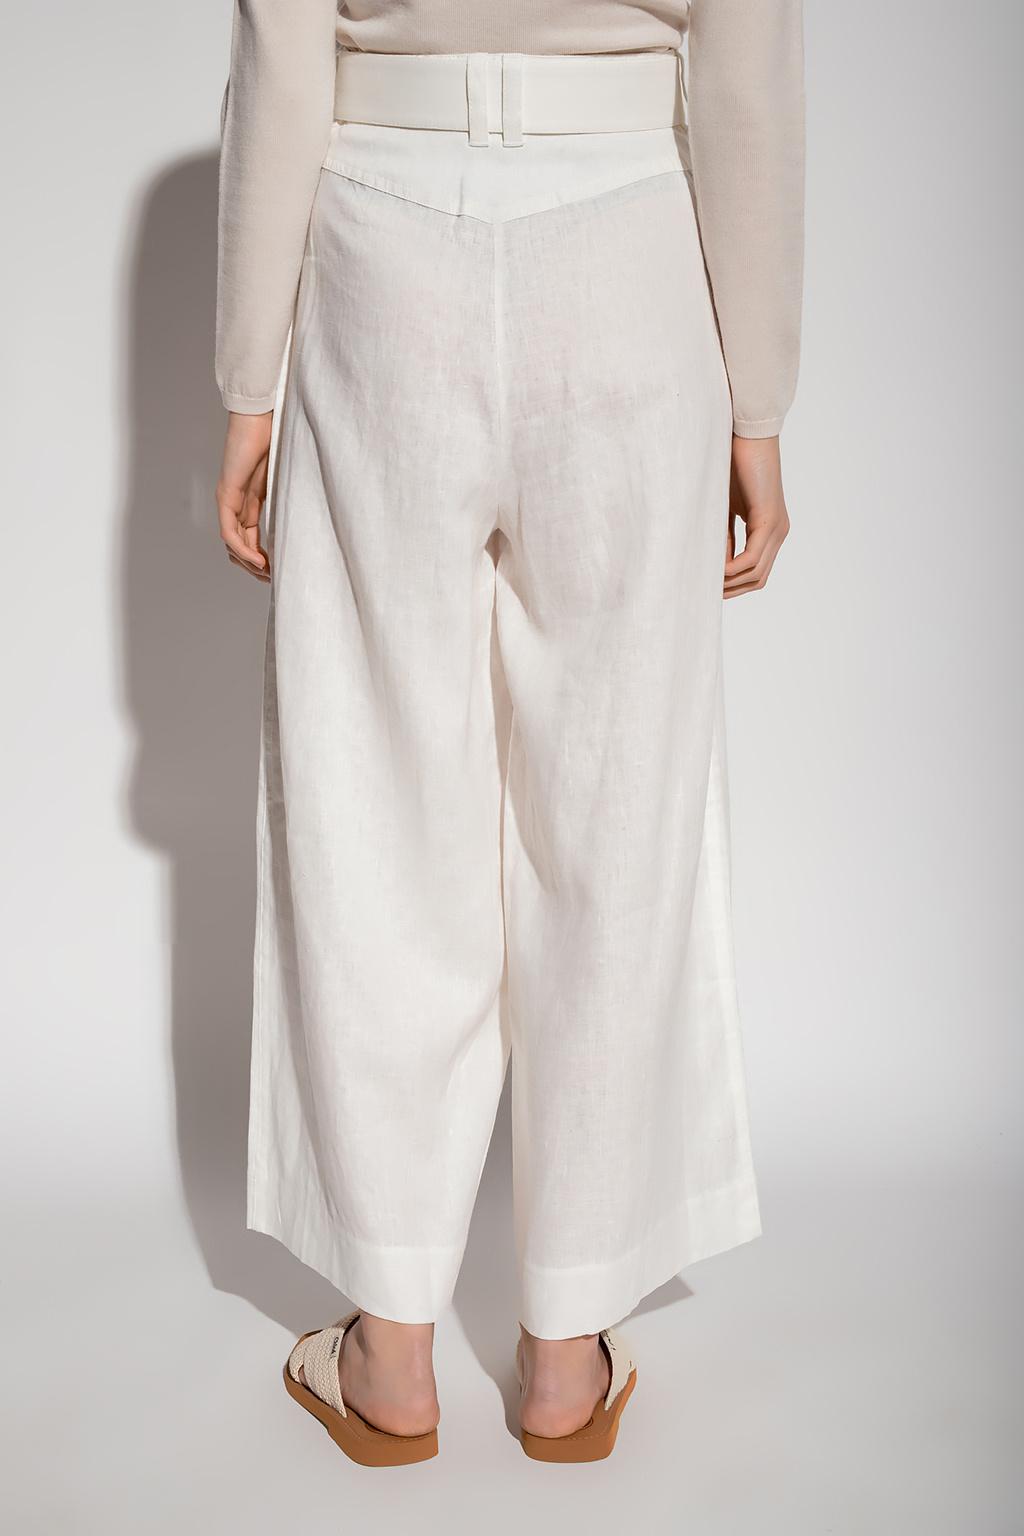 Zimmermann High-waisted Linen Trousers in White